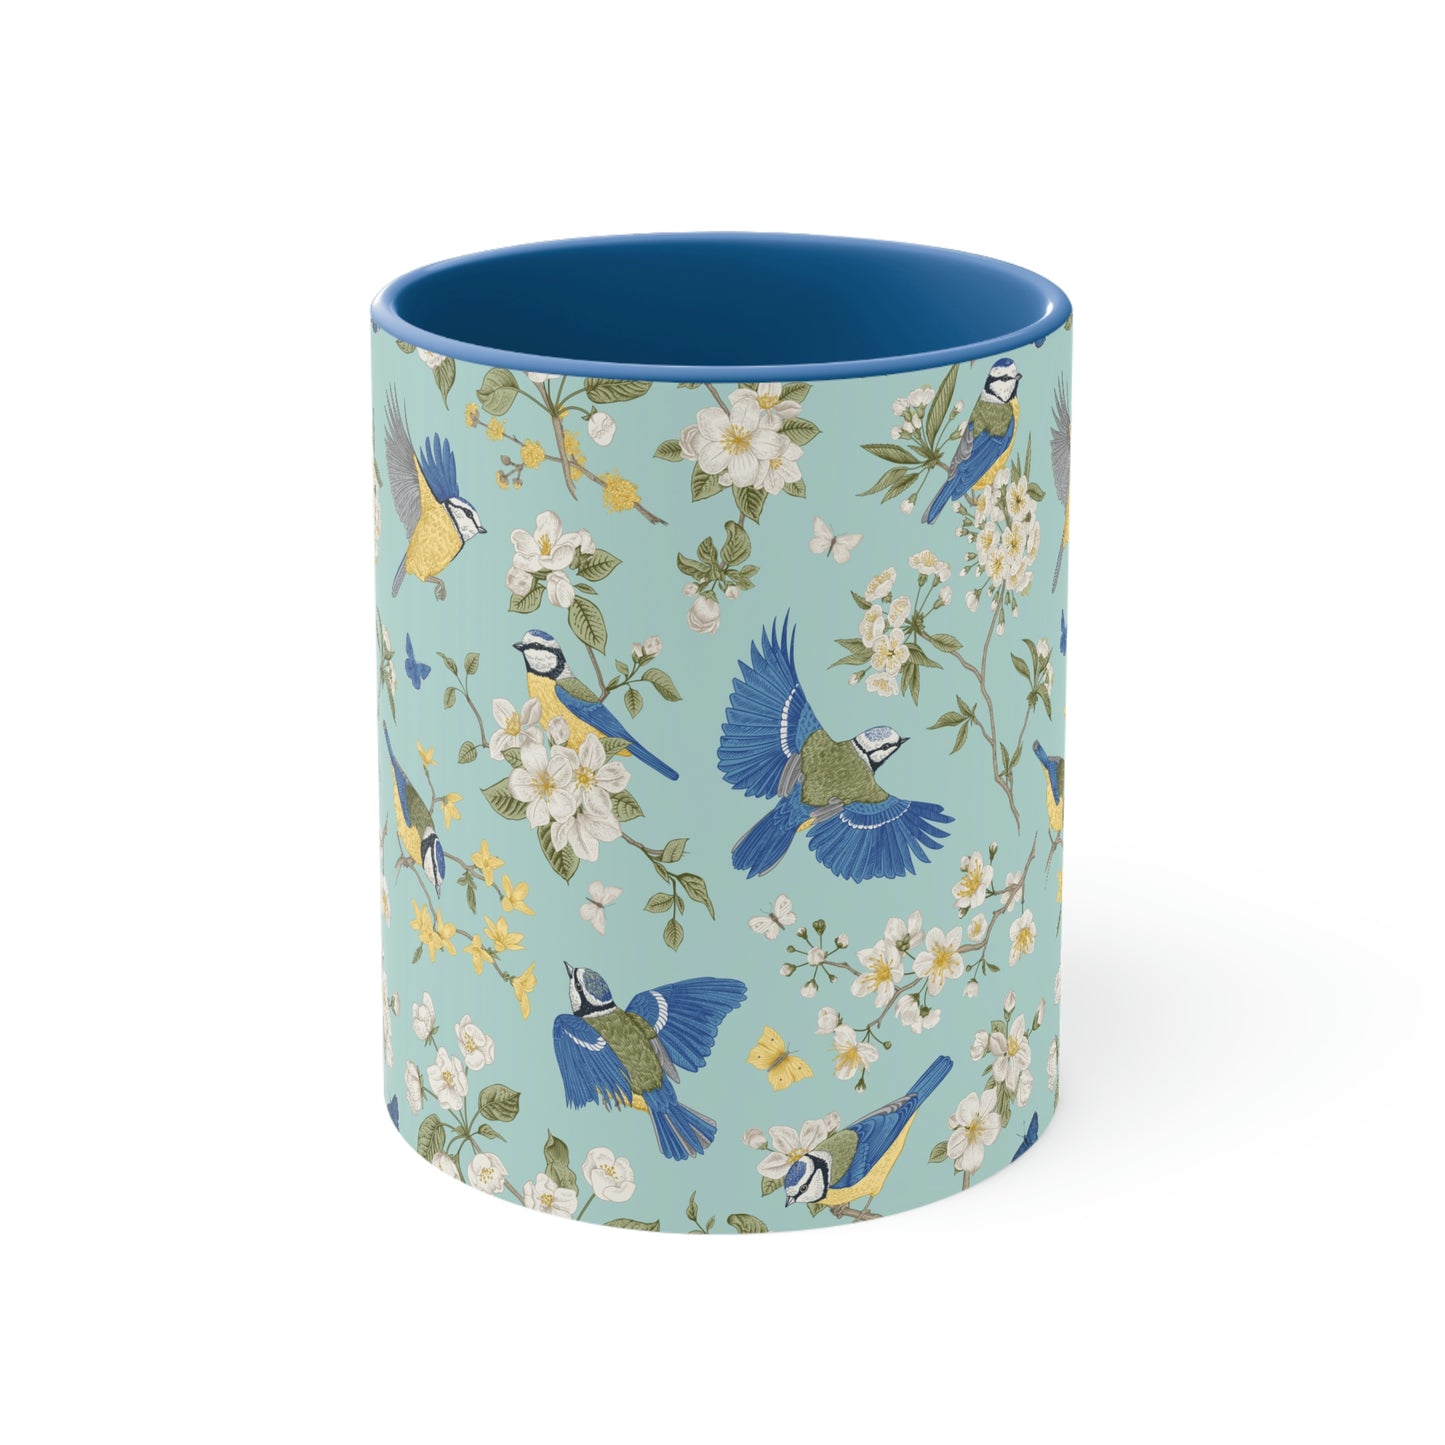 Chinoiserie Birds and Flowers Accent Coffee Mug, 11oz